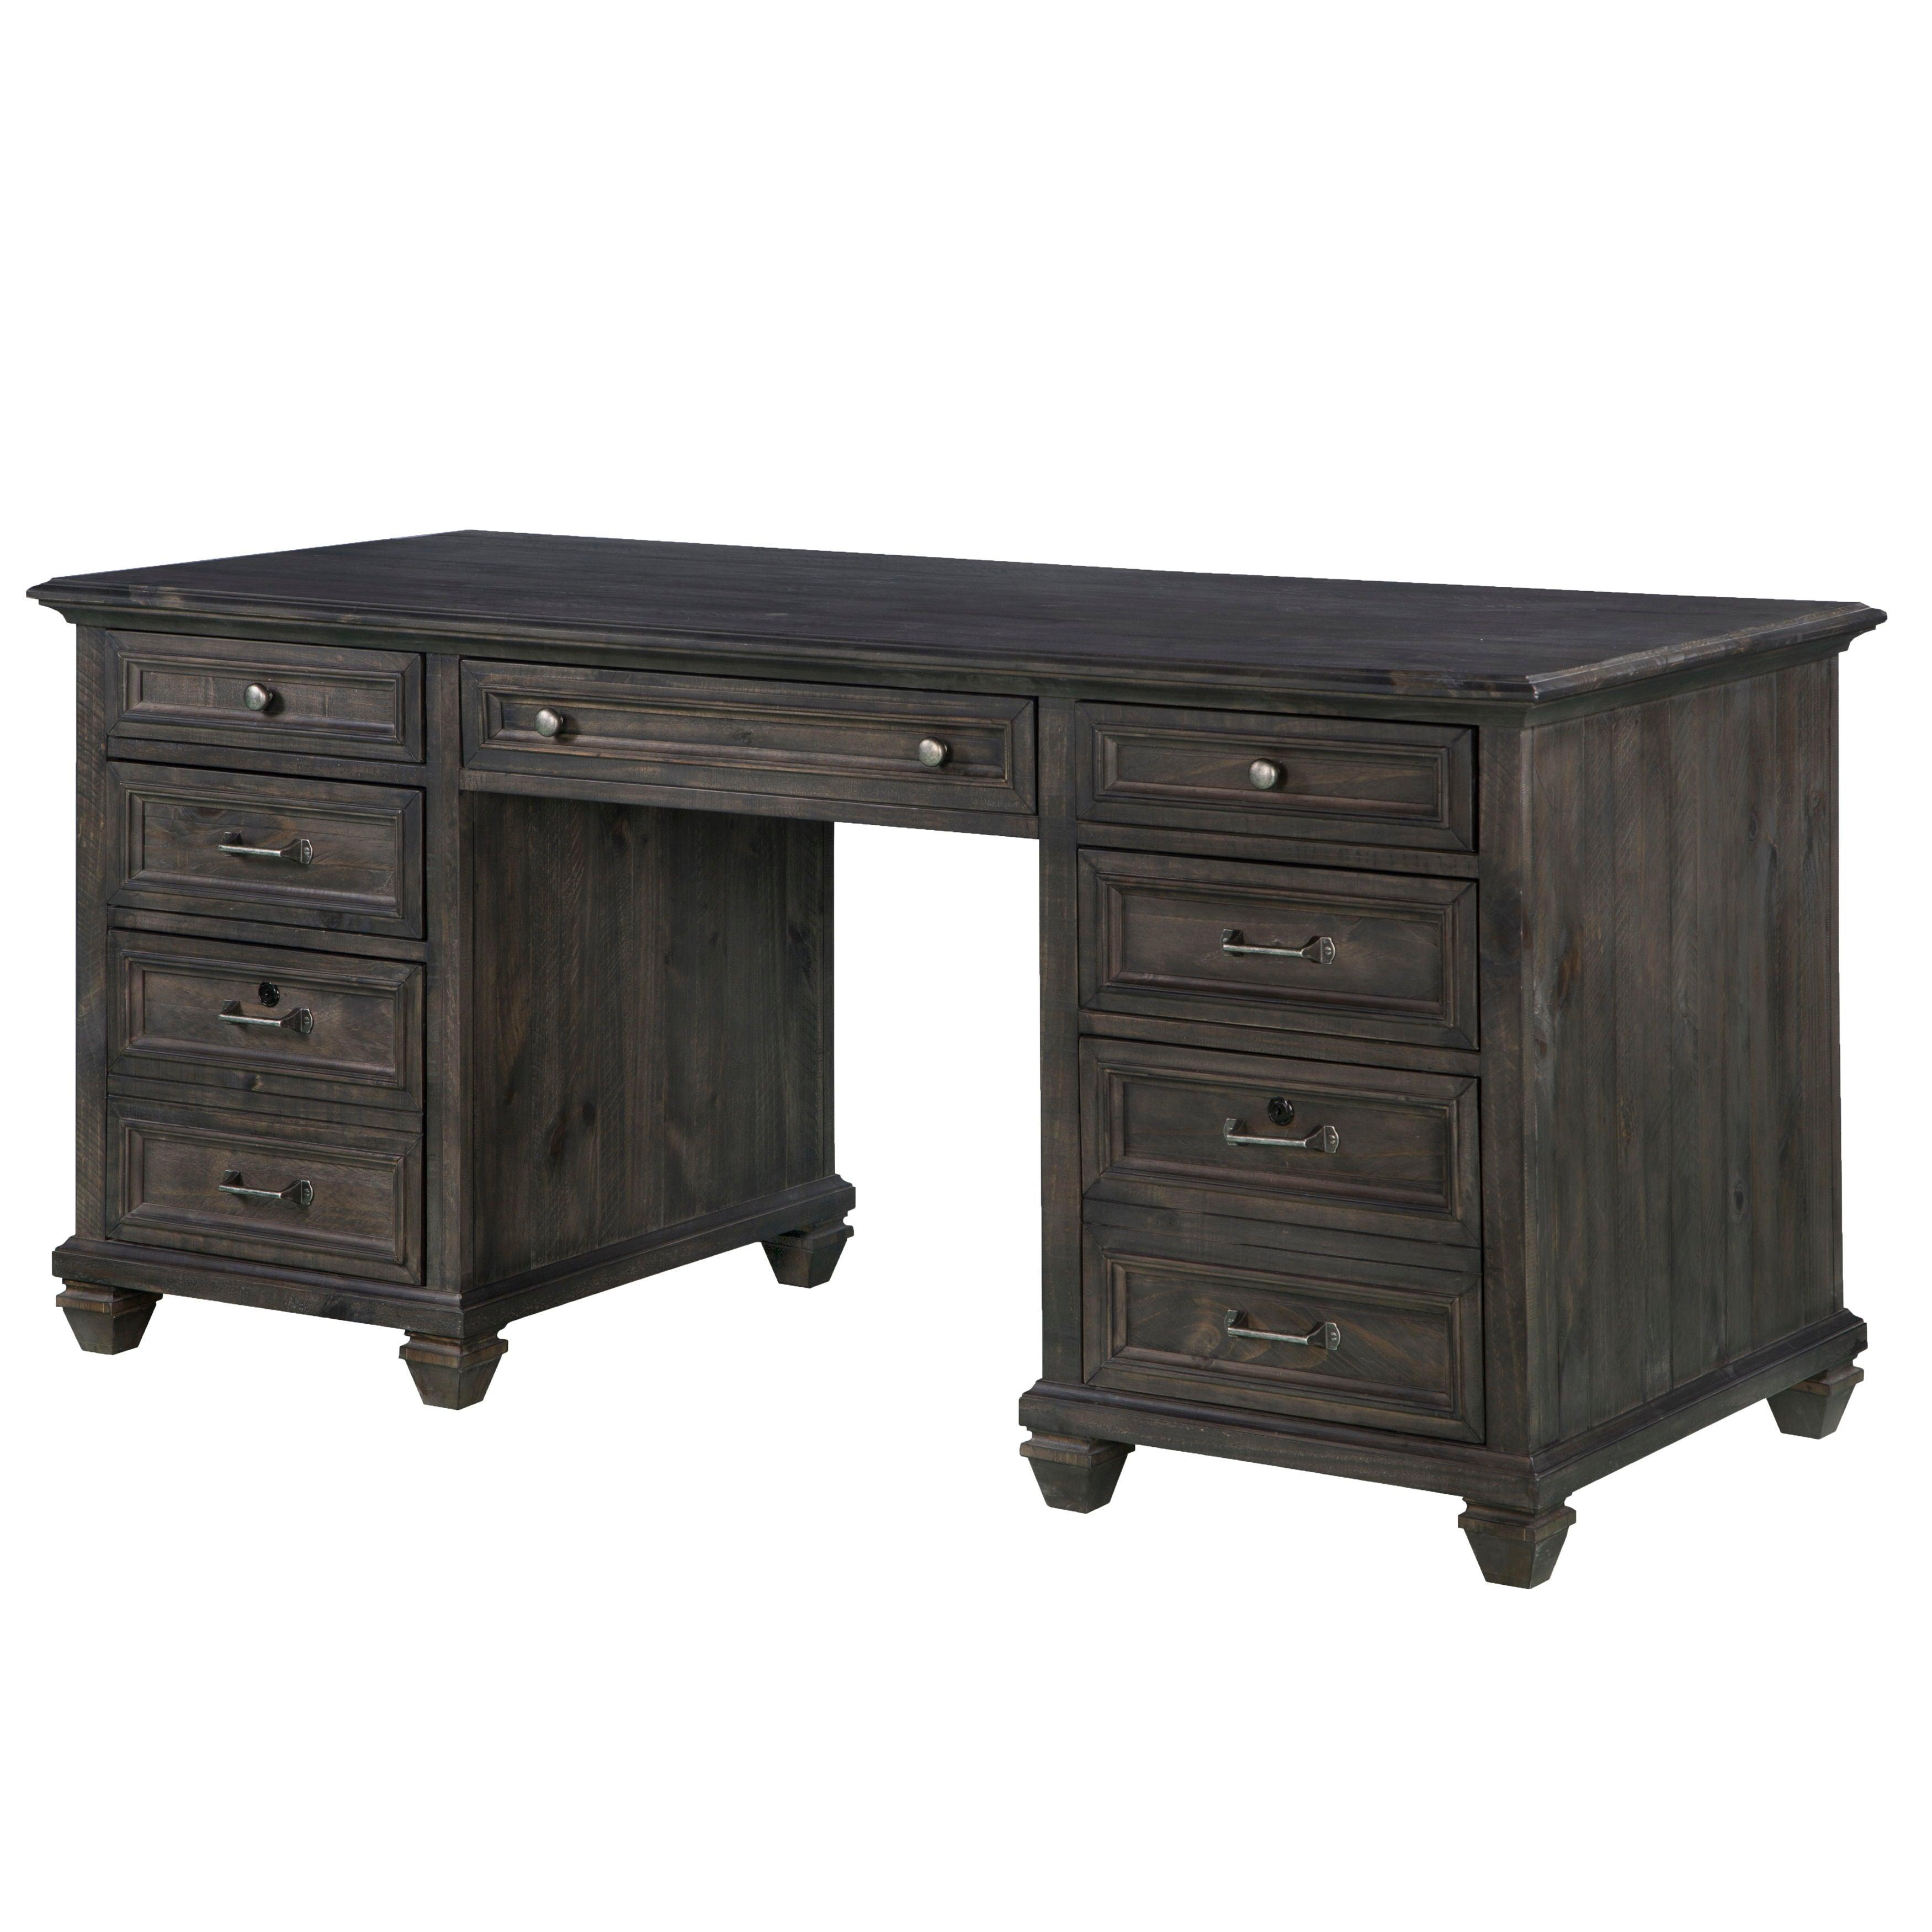 Magnussen Furniture - Sutton Place - Executive Desk - Weathered Charcoal - 5th Avenue Furniture